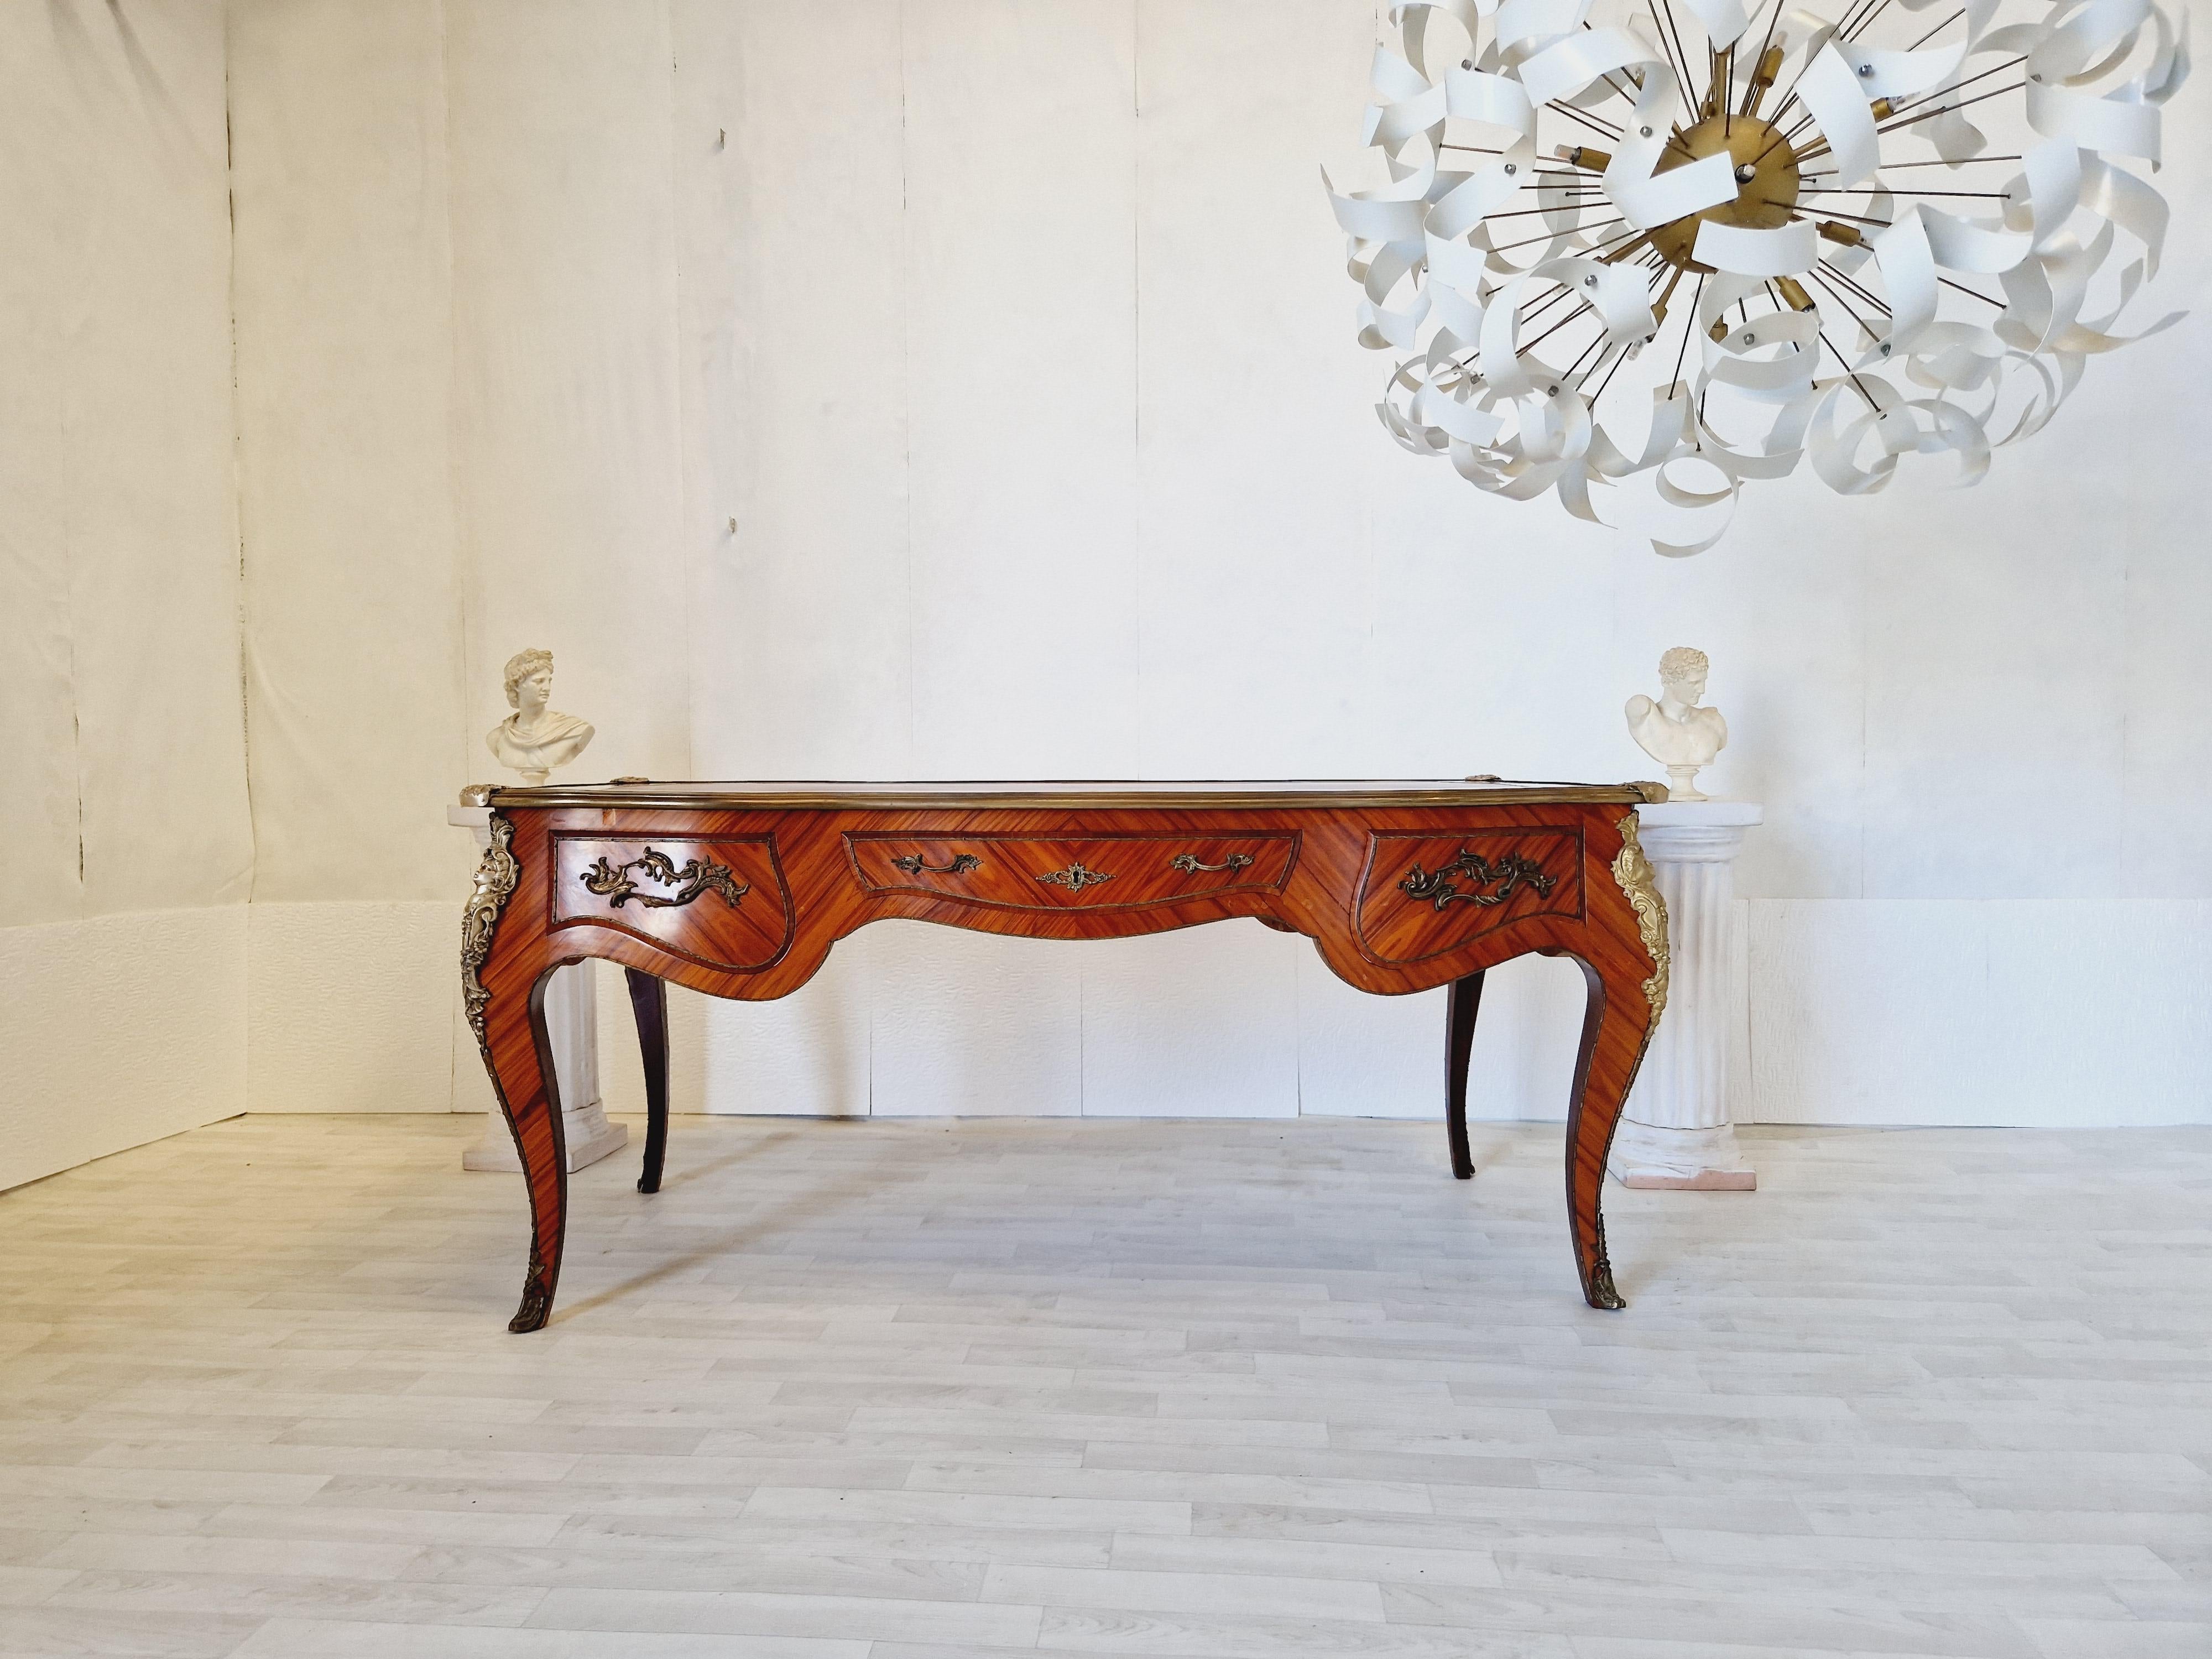 This Rococo-style writing desk was crafted in the 1950s, featuring a stunning rosewood finish and intricate carvings that exude the elegance of the Louis XV style. The antique desk boasts a large rectangular top, measuring 84 cm in width and 177 cm